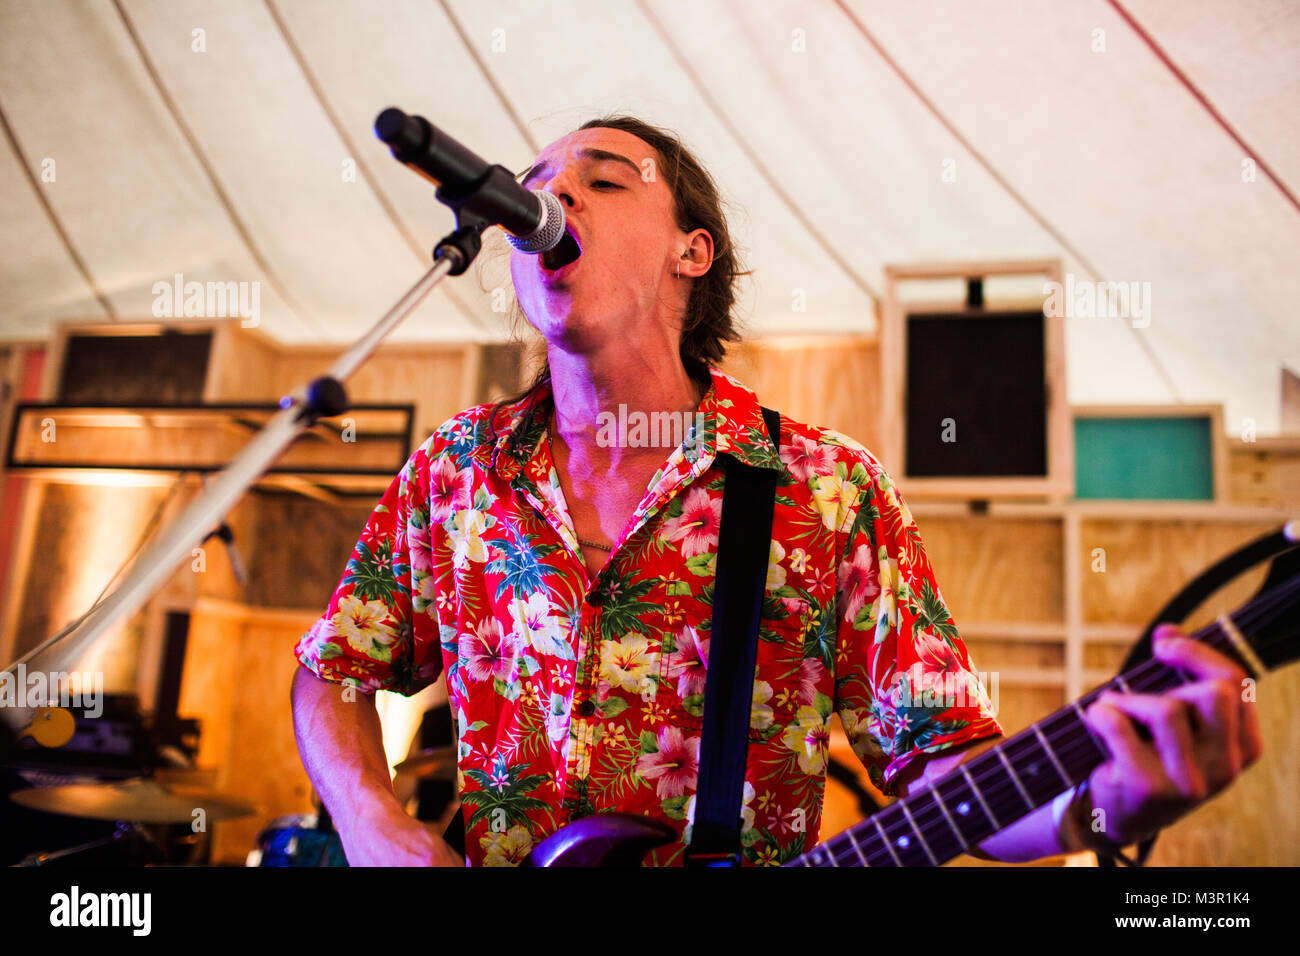 The four London musicians Harry Edwards, Sam Chapman, Mark Thompson and Charlie Pelling are together known as the British band Maui. They are here pictured at a live concert at the Danish art and music festival Trailerpark Festival 2014 in Copenhagen. Denmark, 31/07 2014. Stock Photo